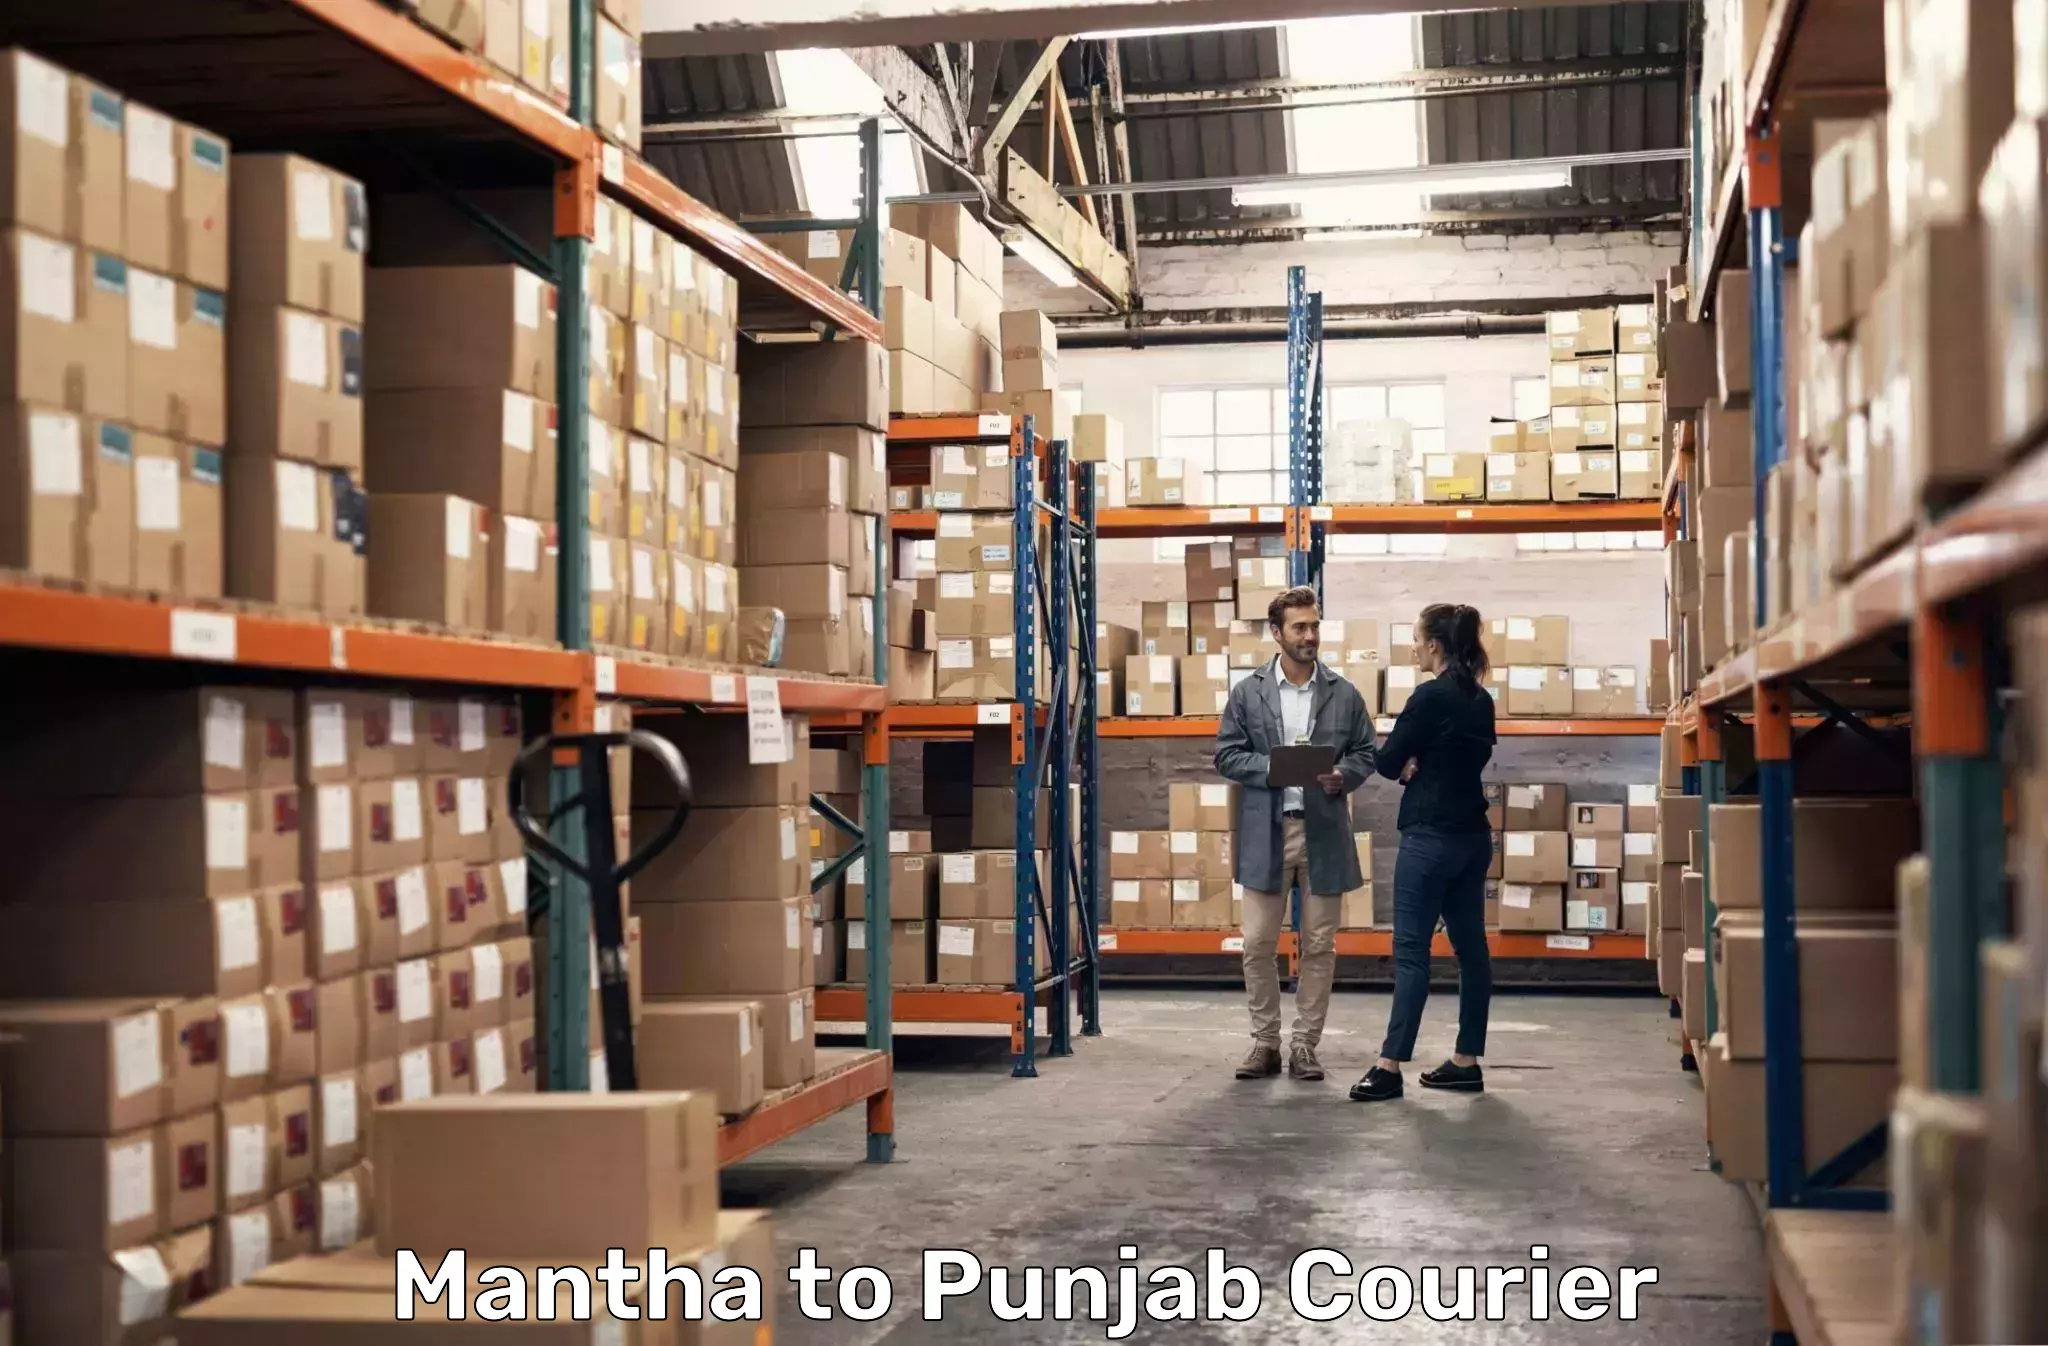 Overnight delivery services Mantha to Punjab